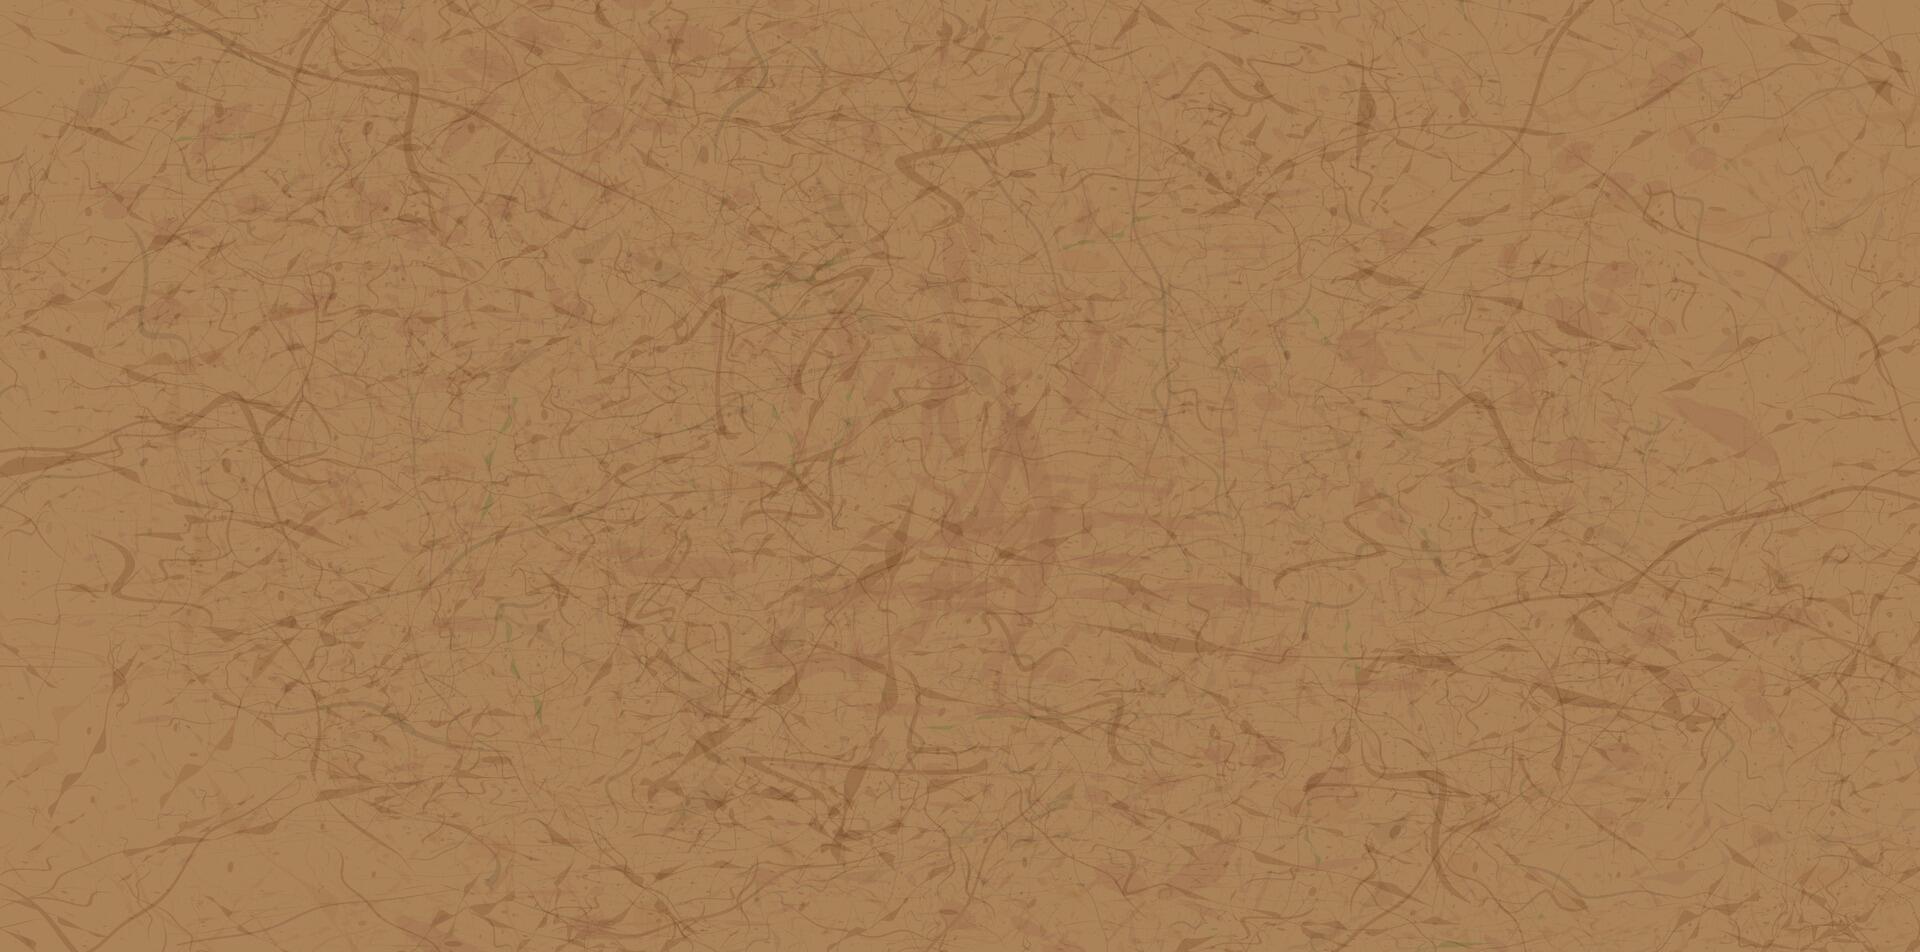 Abstract brown rough wrapping paper,material for recycling or packaging.Carton  vector texture.